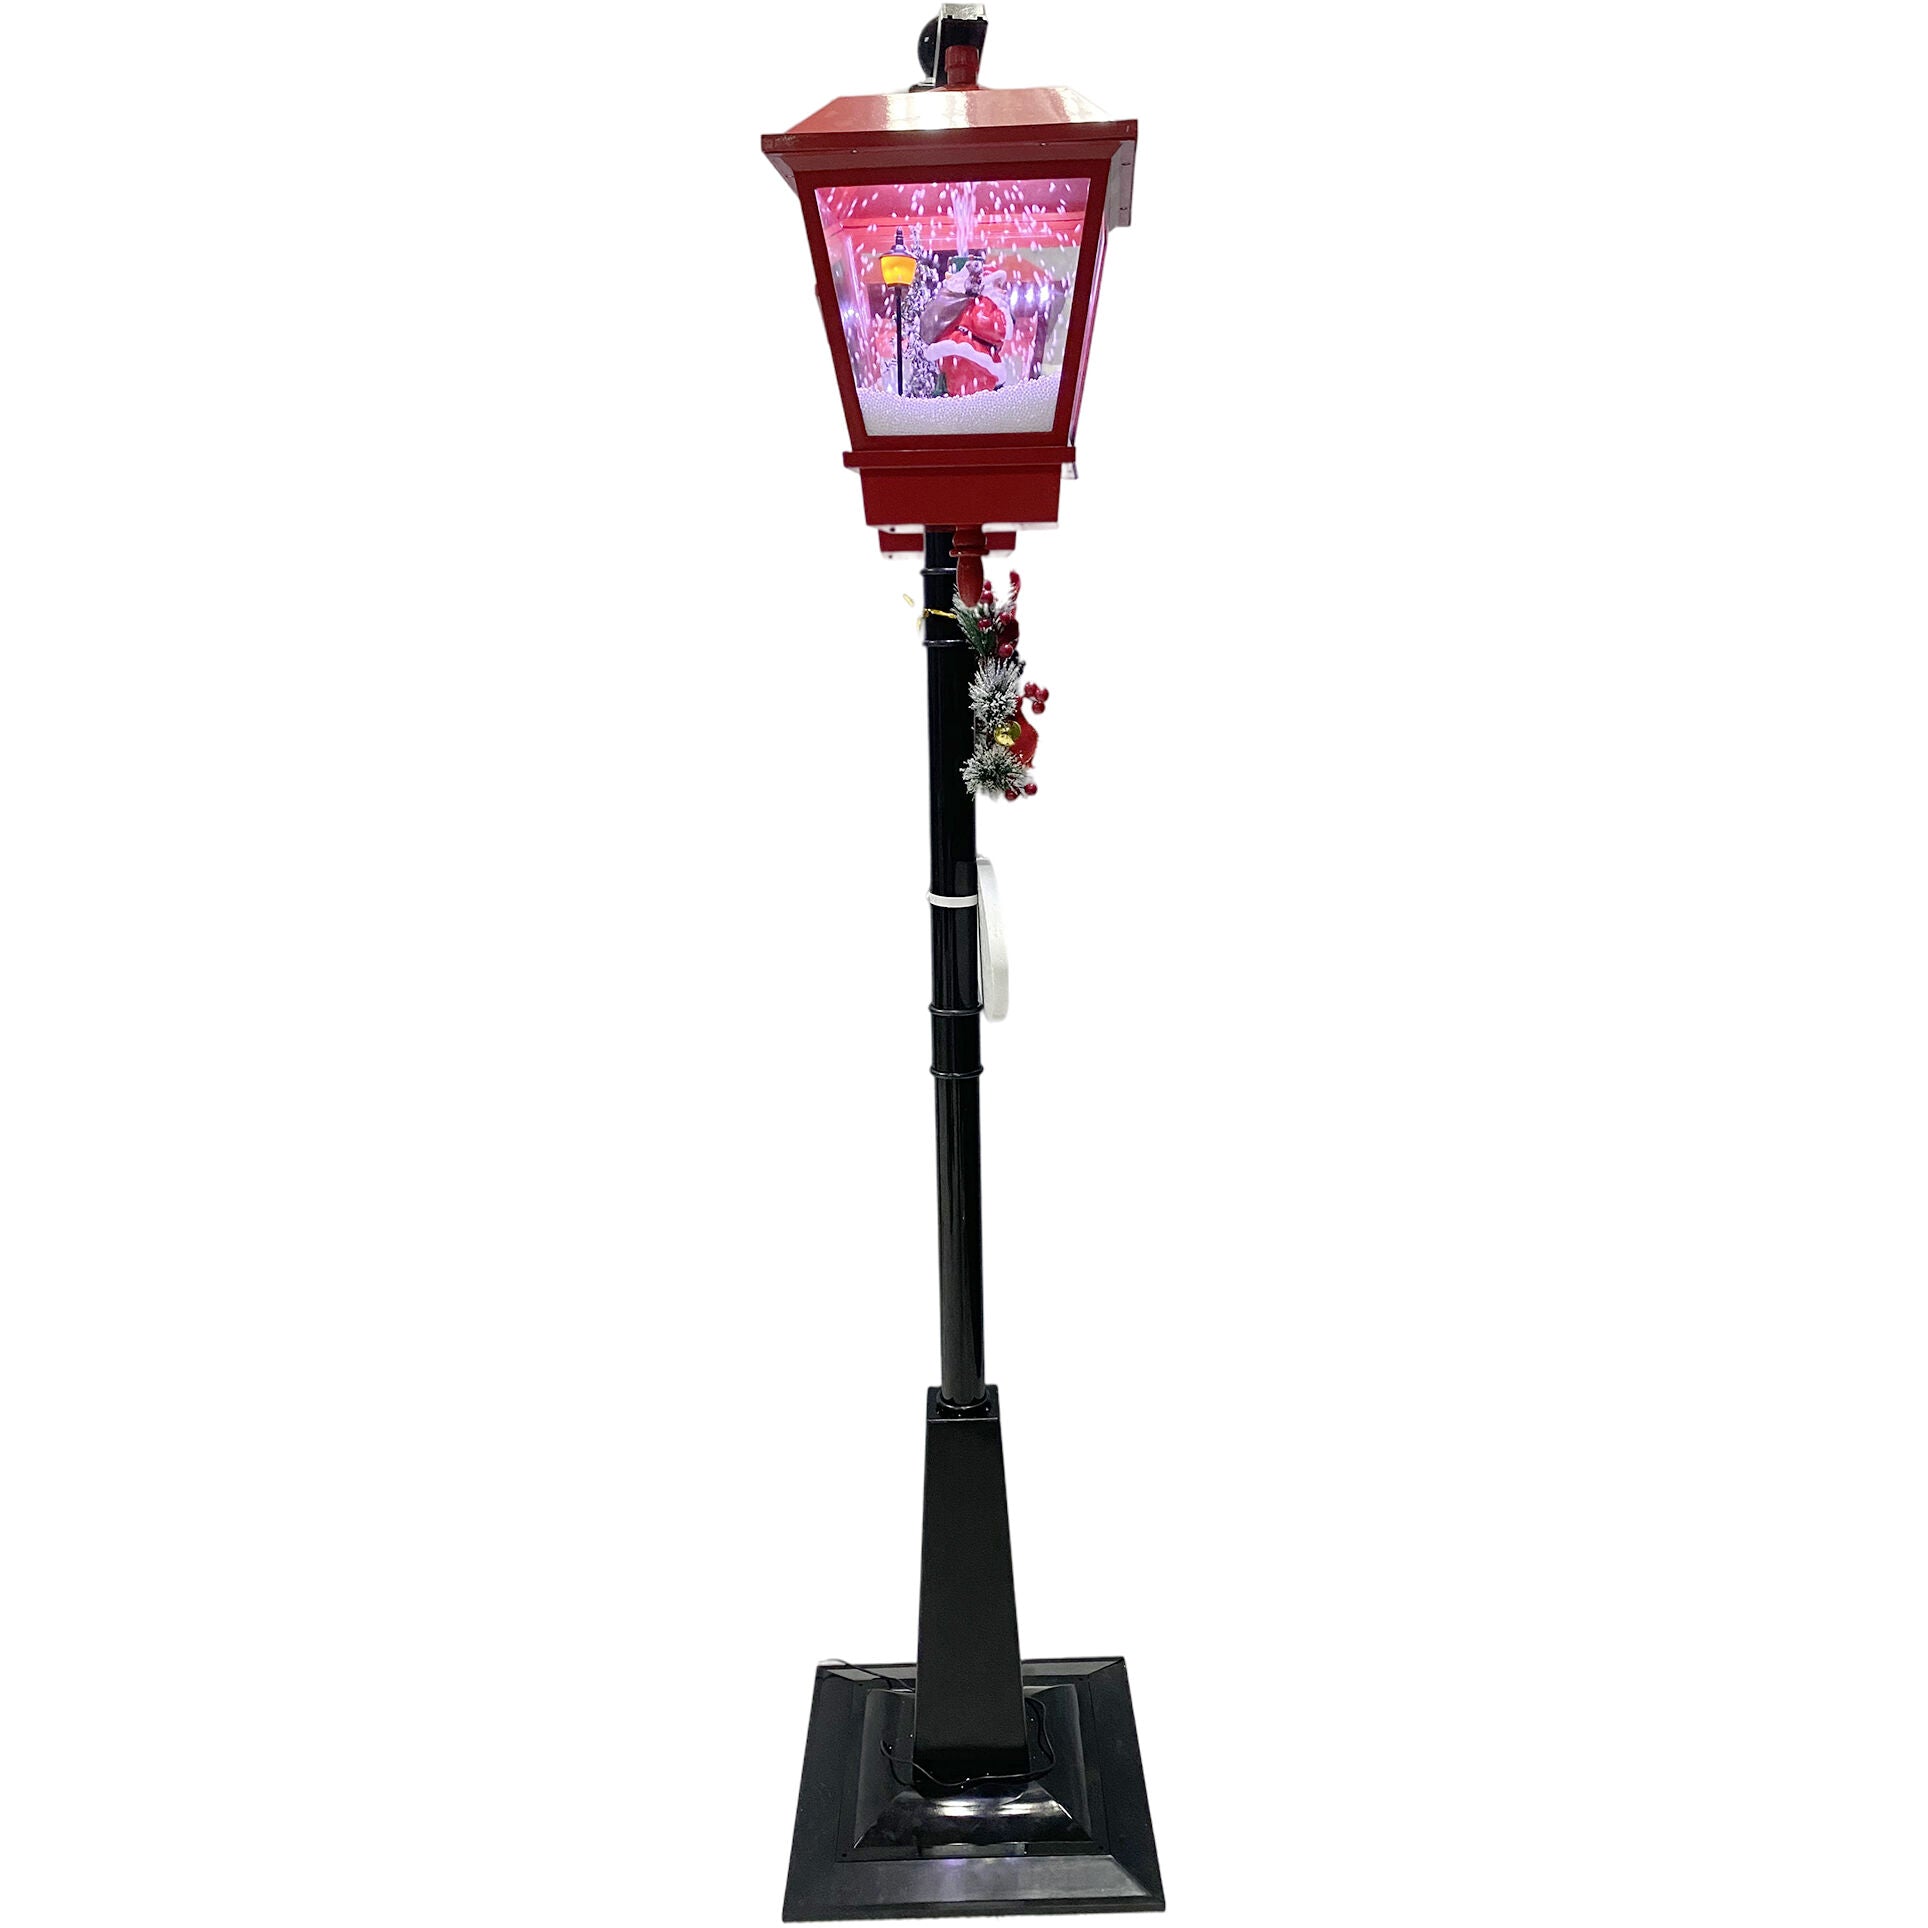 Fraser Hill Farm -  Let It Snow Series 74-In. Double Lantern Street Lamp w/ Santa Claus, Christmas Tree, 1 Sign, Cascading Snow, Music, Red/Black